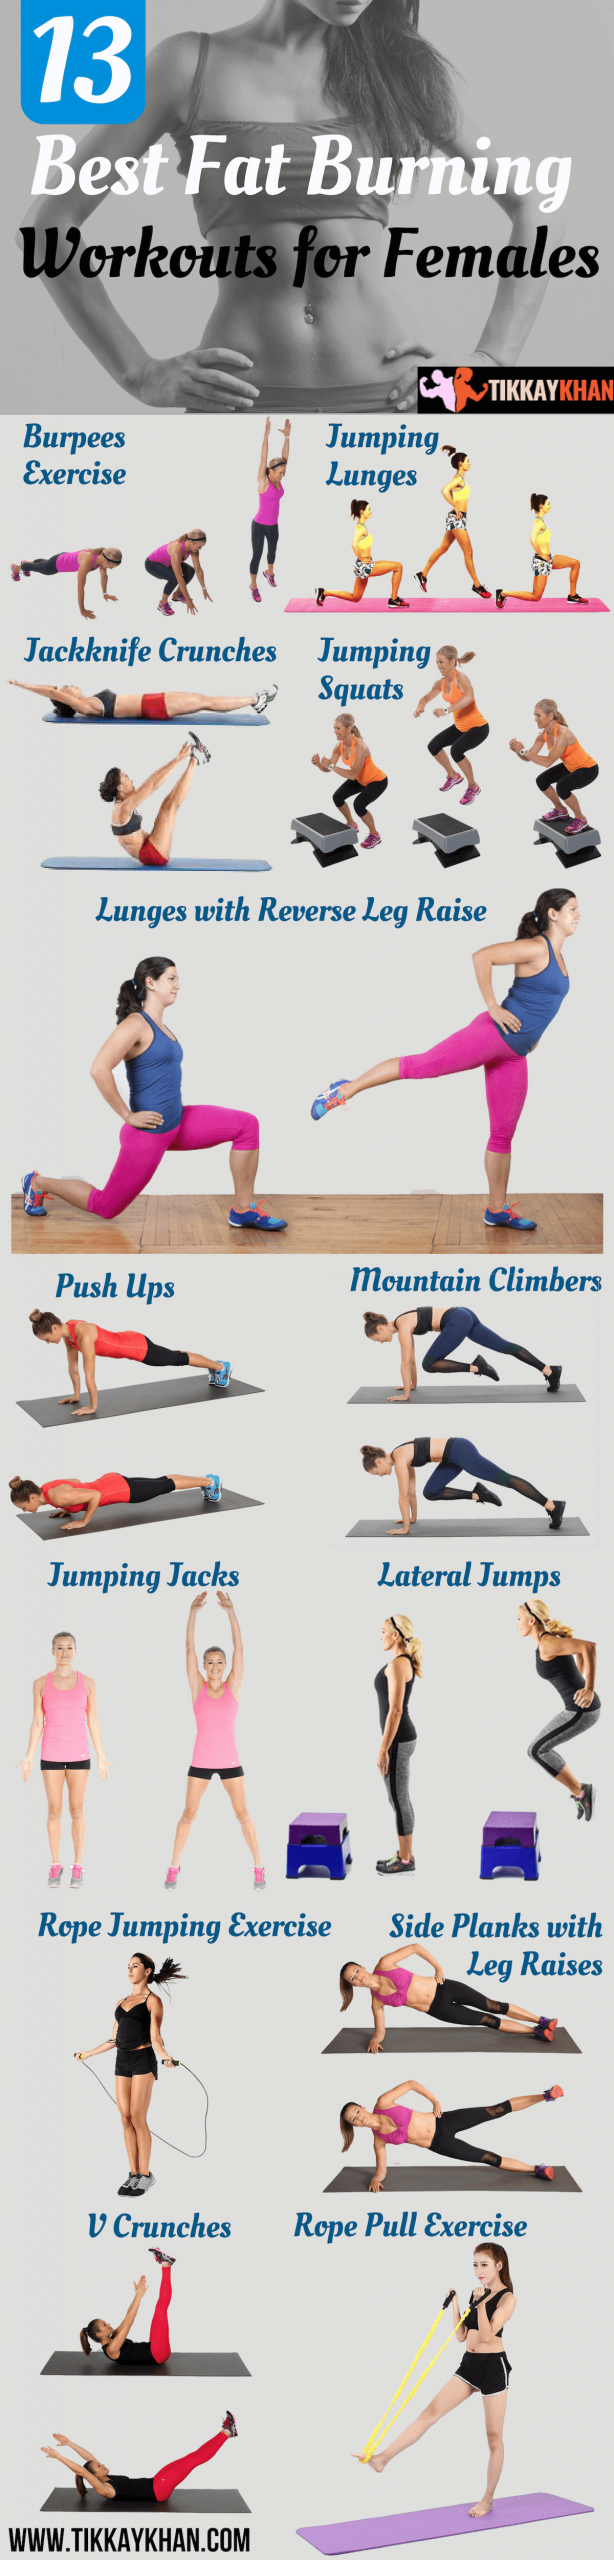 Fat Burning Workout
 13 Best Fat Burning Workouts for Females Health & Fitness